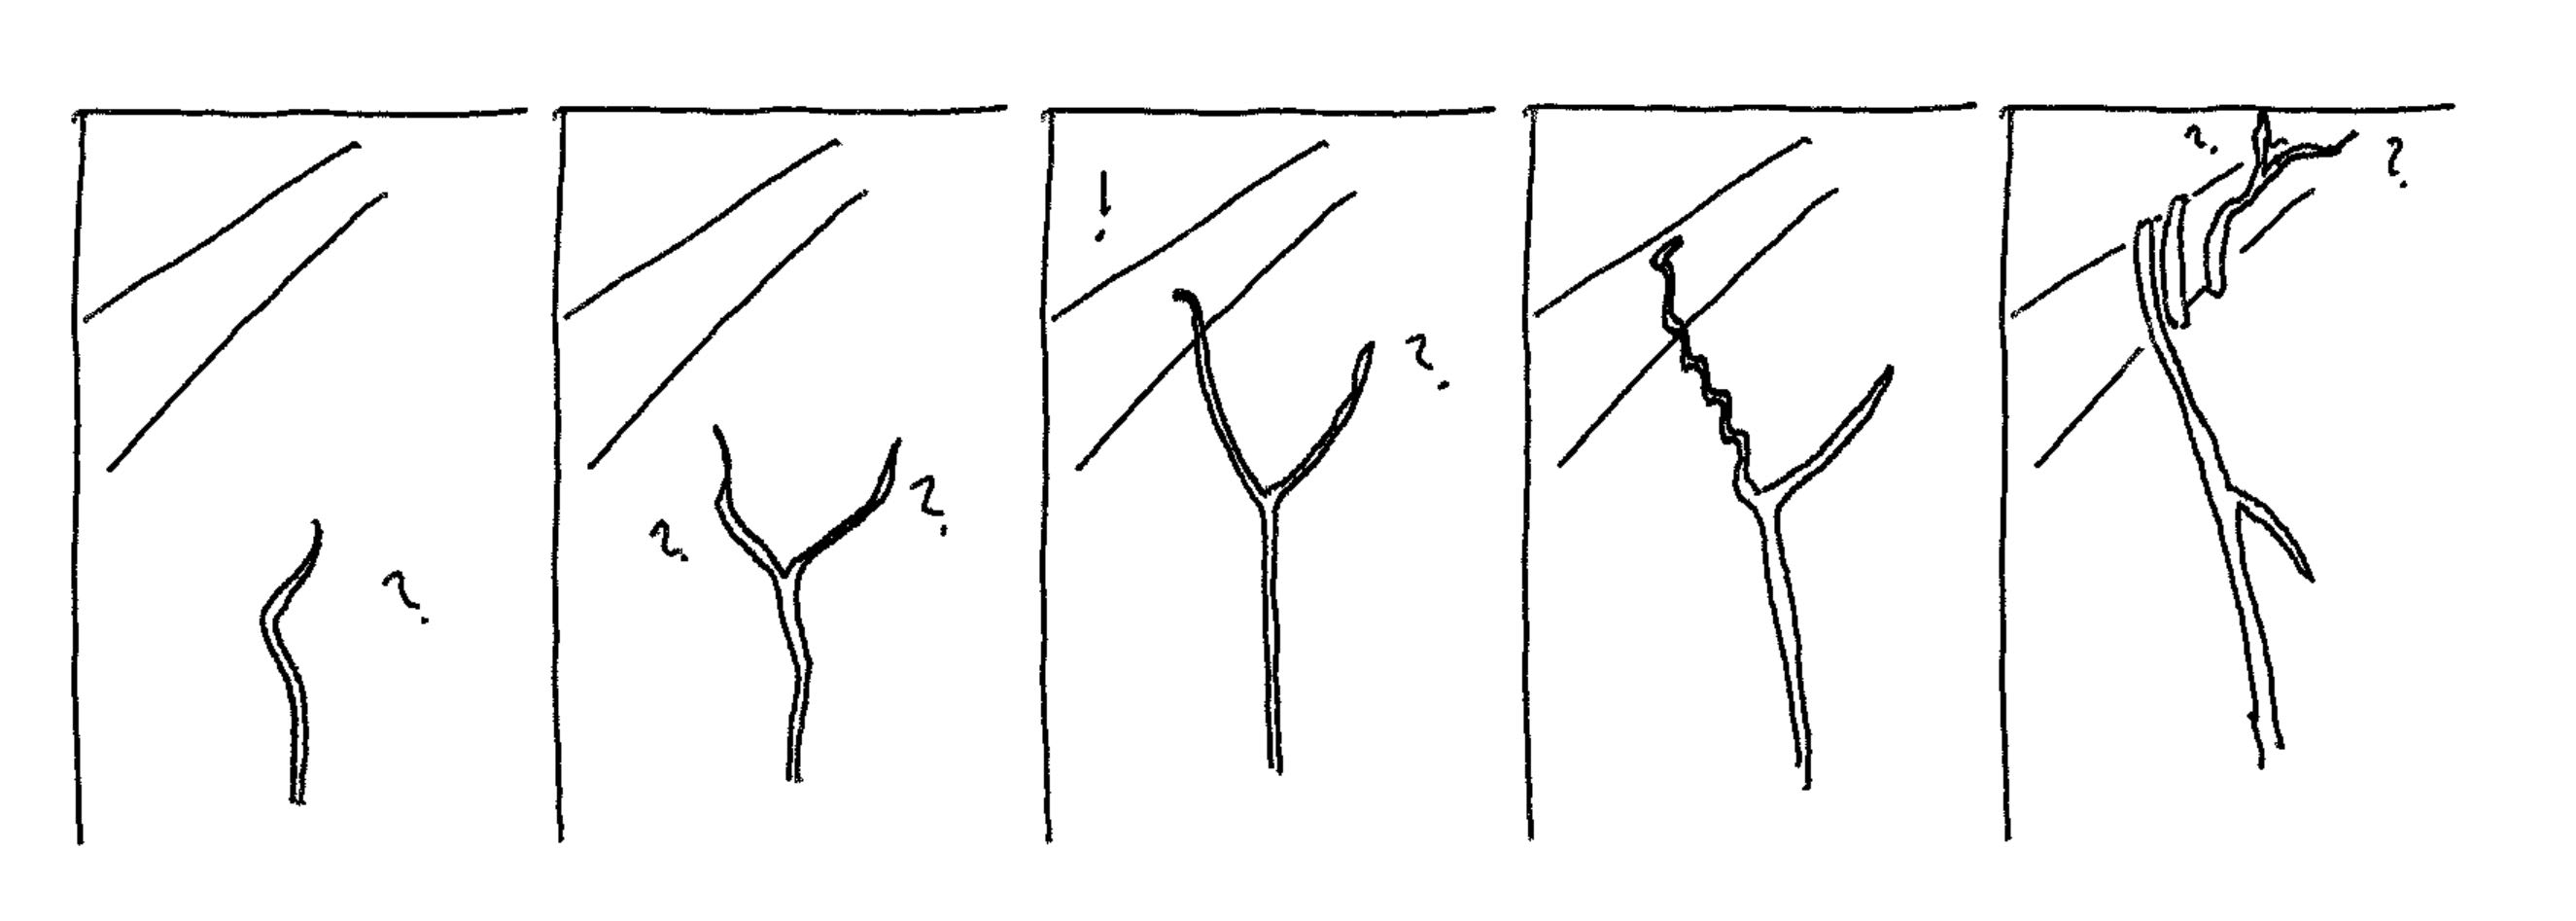 A climbing plant sends out questing flailing tendrils, then finds a branch, executes coiling and growth, and sends out new tendrils